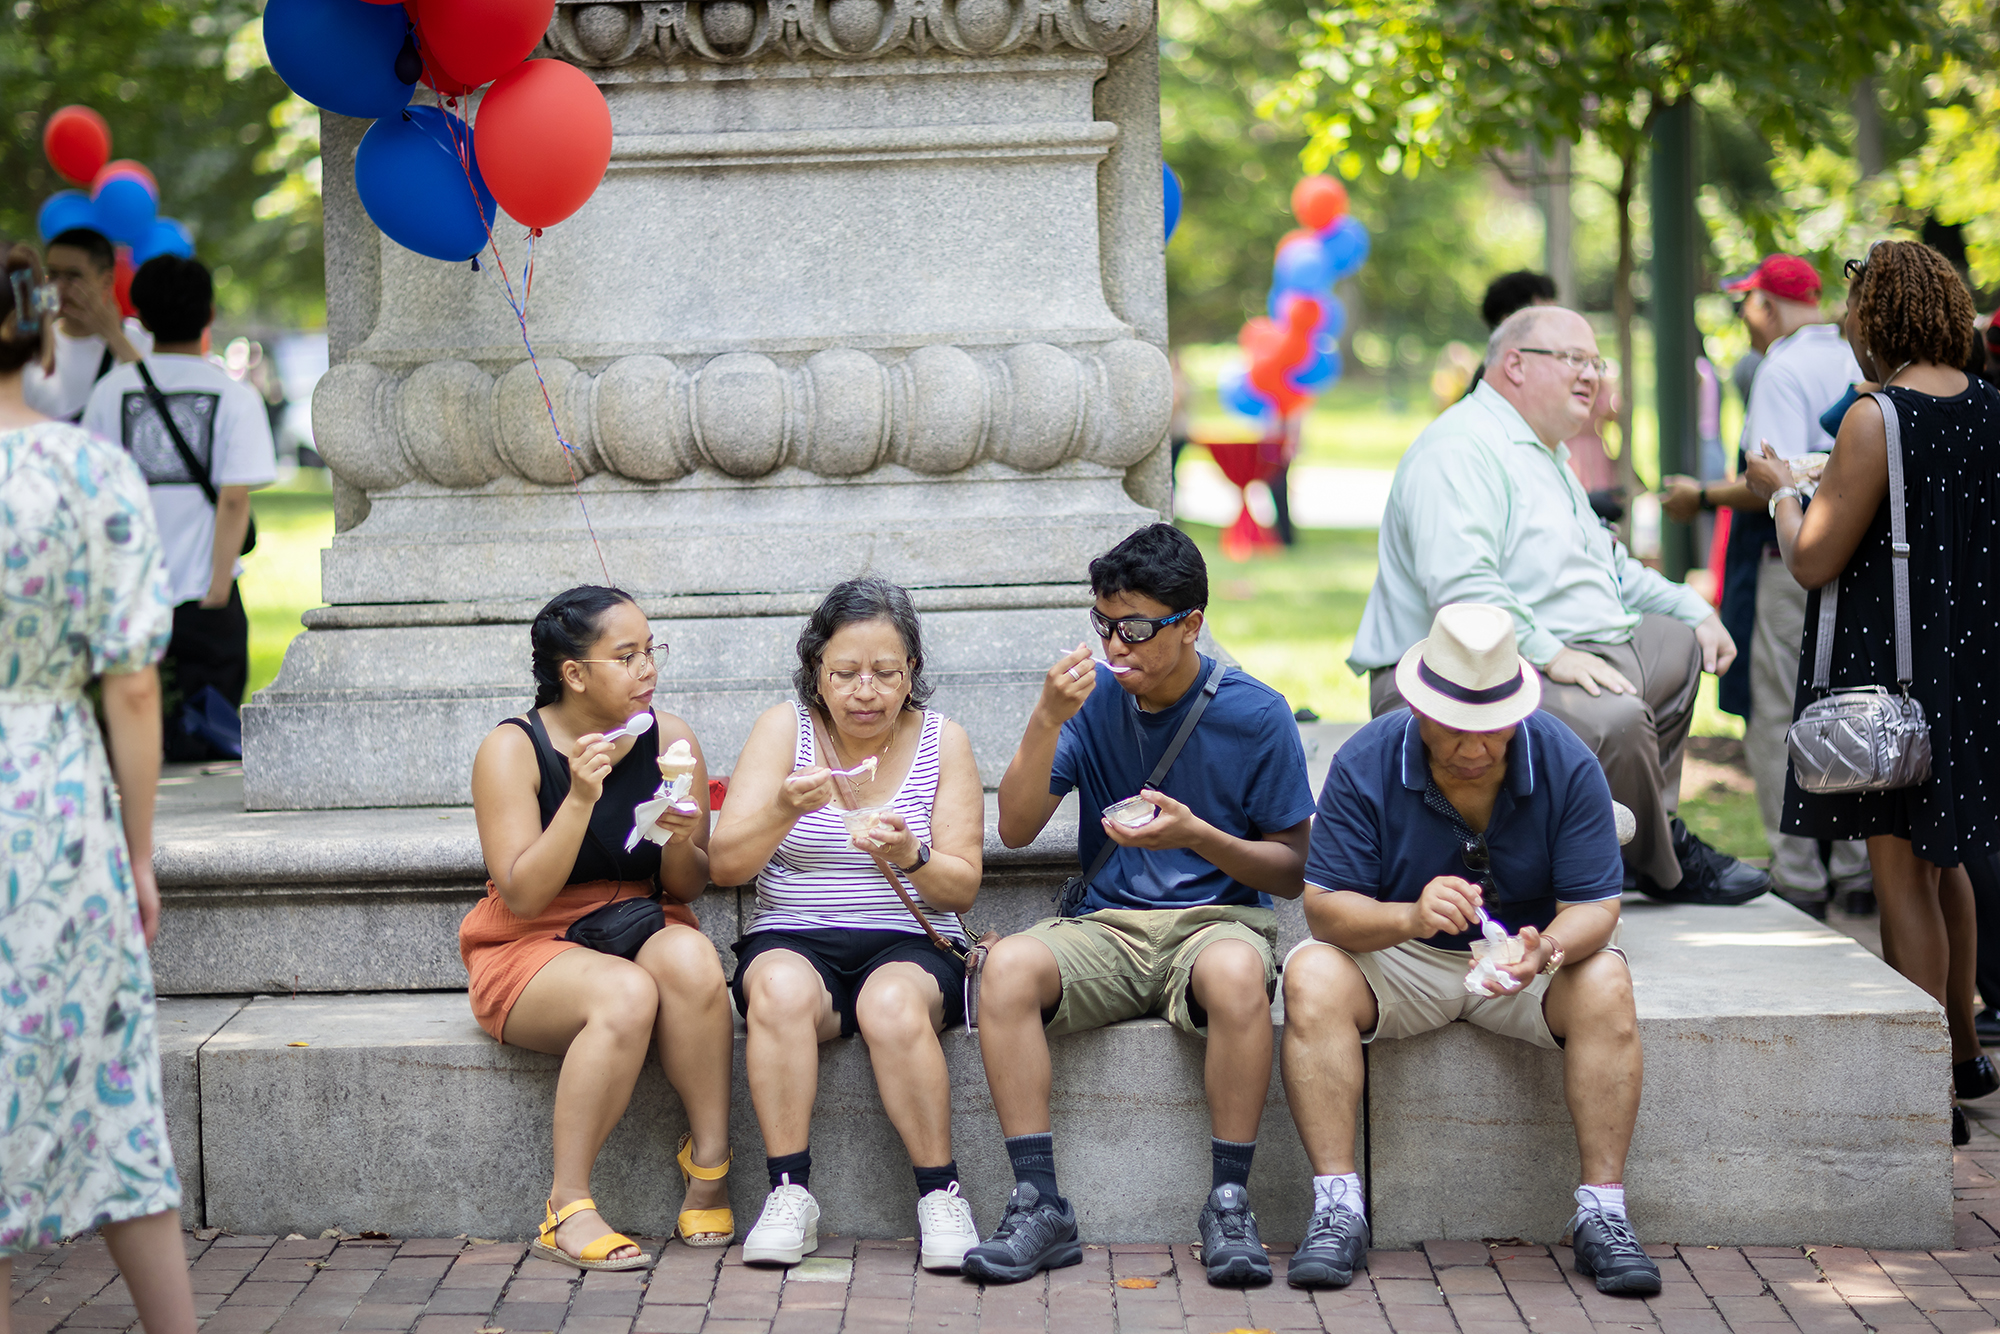 Four people eating ice cream by the Ben Franklin statue on College Green.